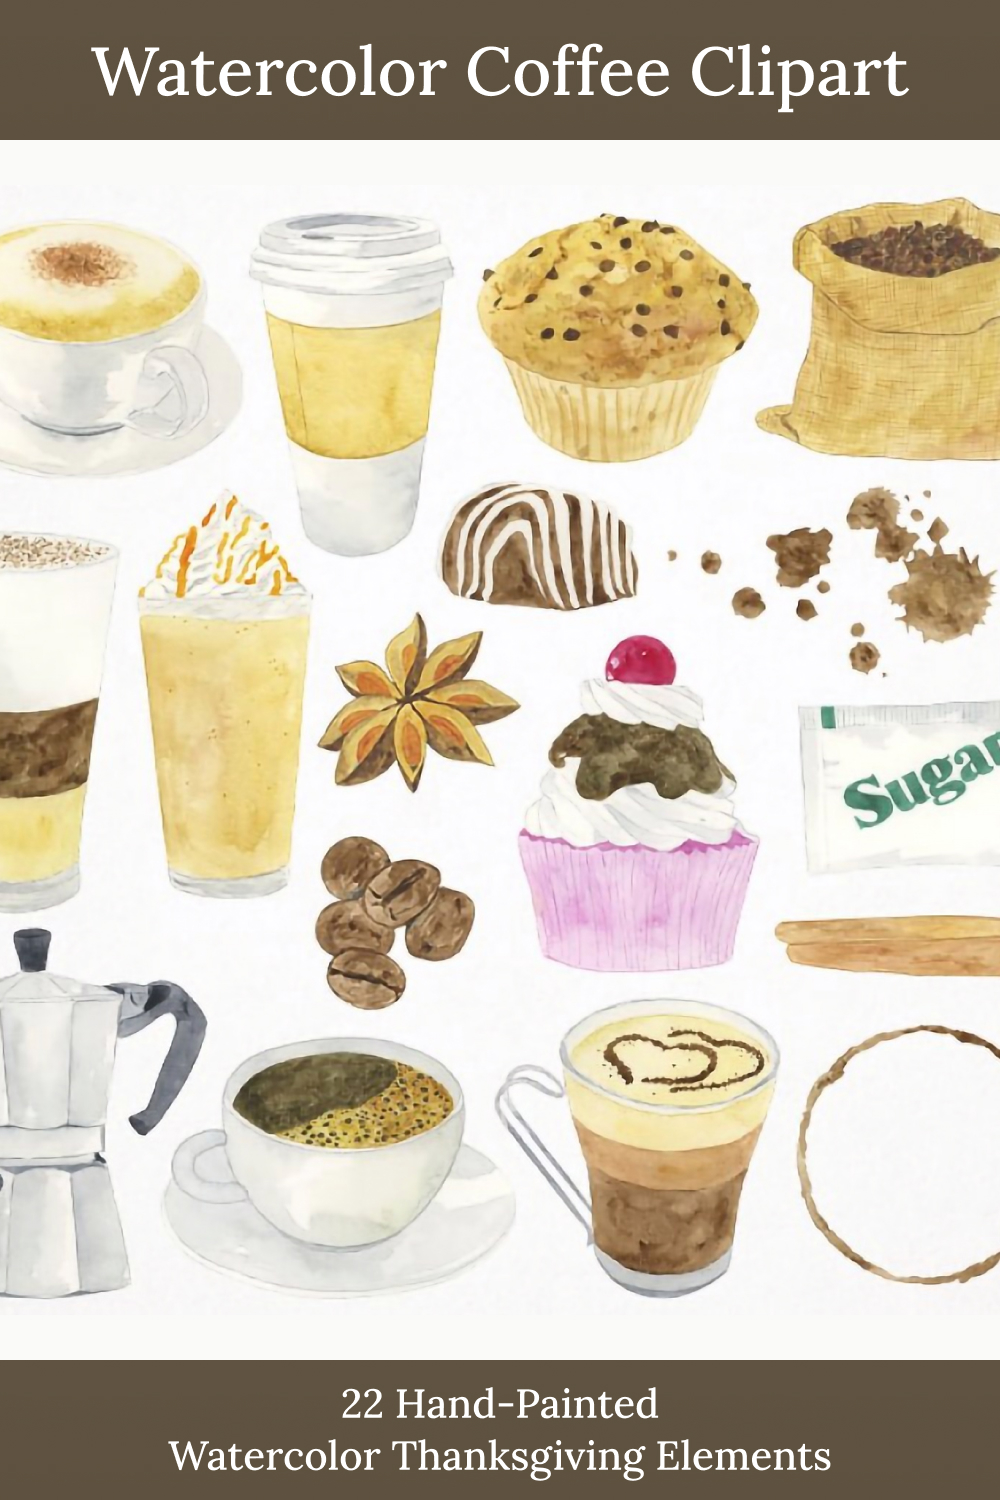 Watercolor coffee clipart of pinterest.